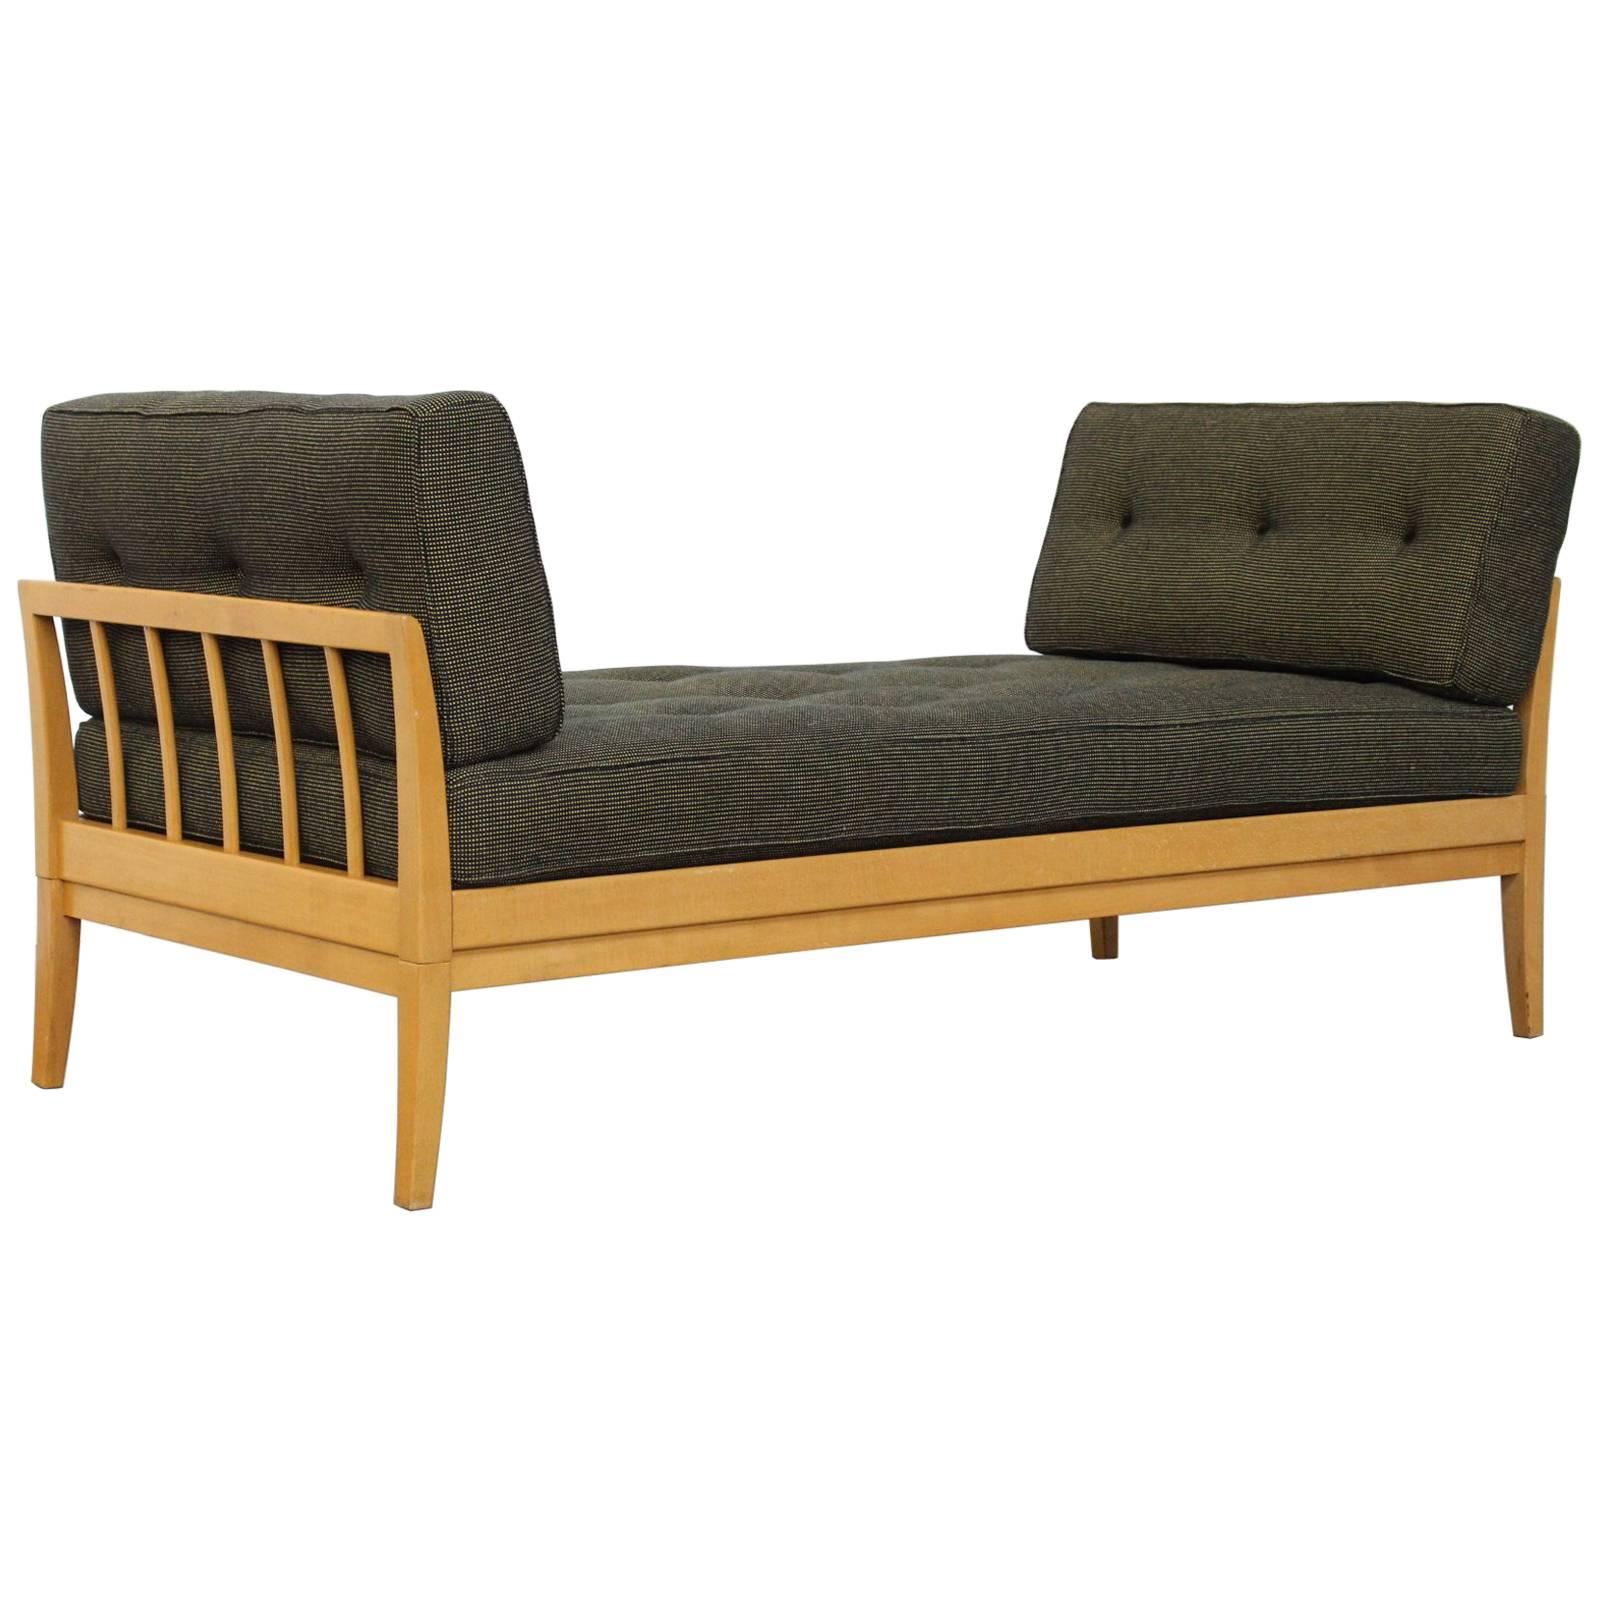 Very rare wonderful birch wood daybed by Knoll, part of the Antimott range of furniture. The right armrest has a sliding mechanism and extends to 210cm (83 inches). The original tufted fabric cushions are in perfect condition and the wood is